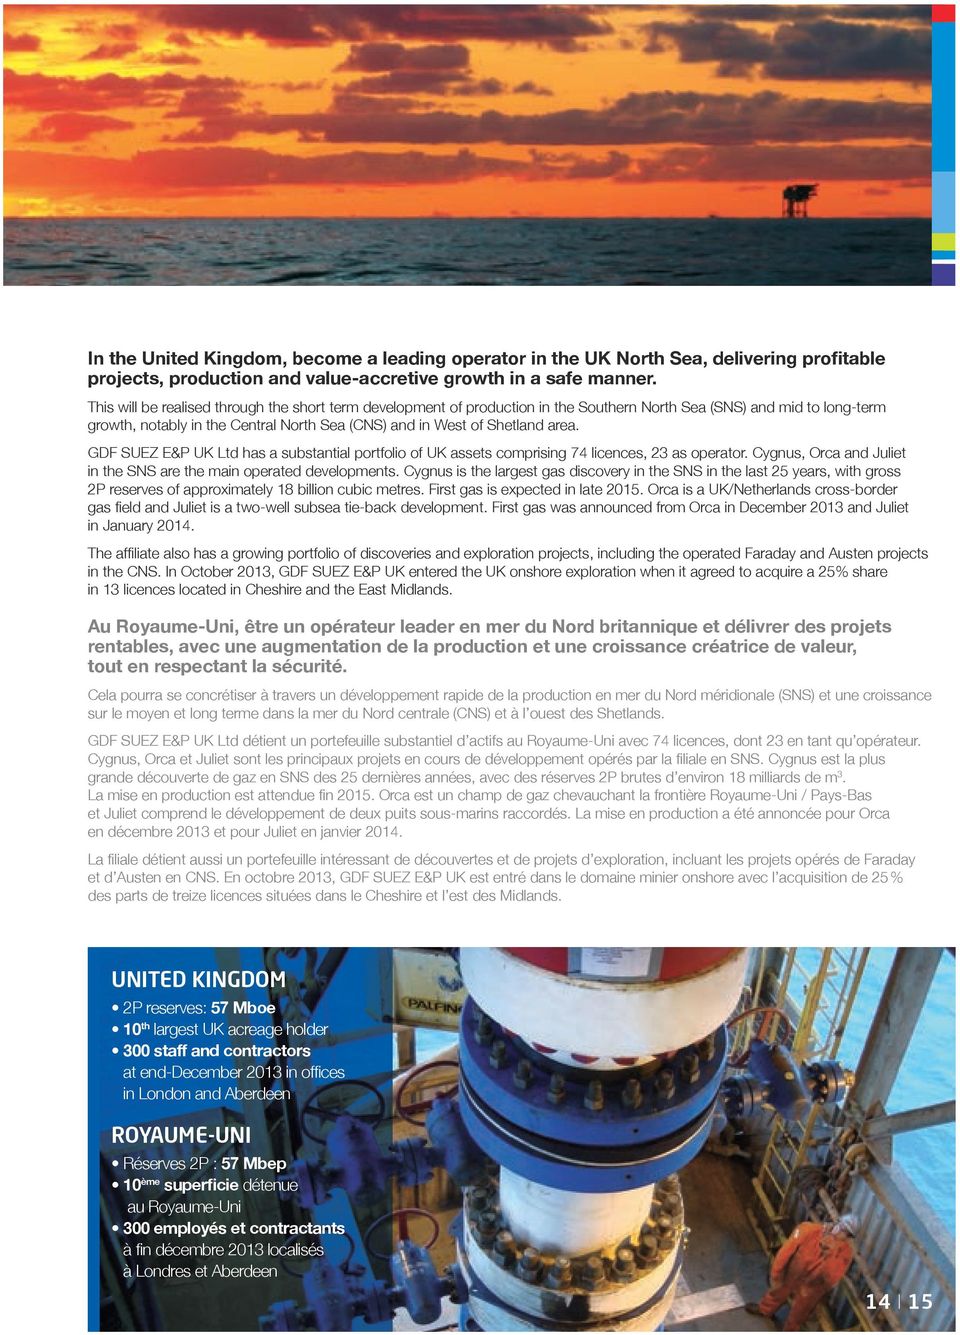 GDF SUEZ E&P UK Ltd has a substantial portfolio of UK assets comprising 74 licences, 23 as operator. Cygnus, Orca and Juliet in the SNS are the main operated developments.